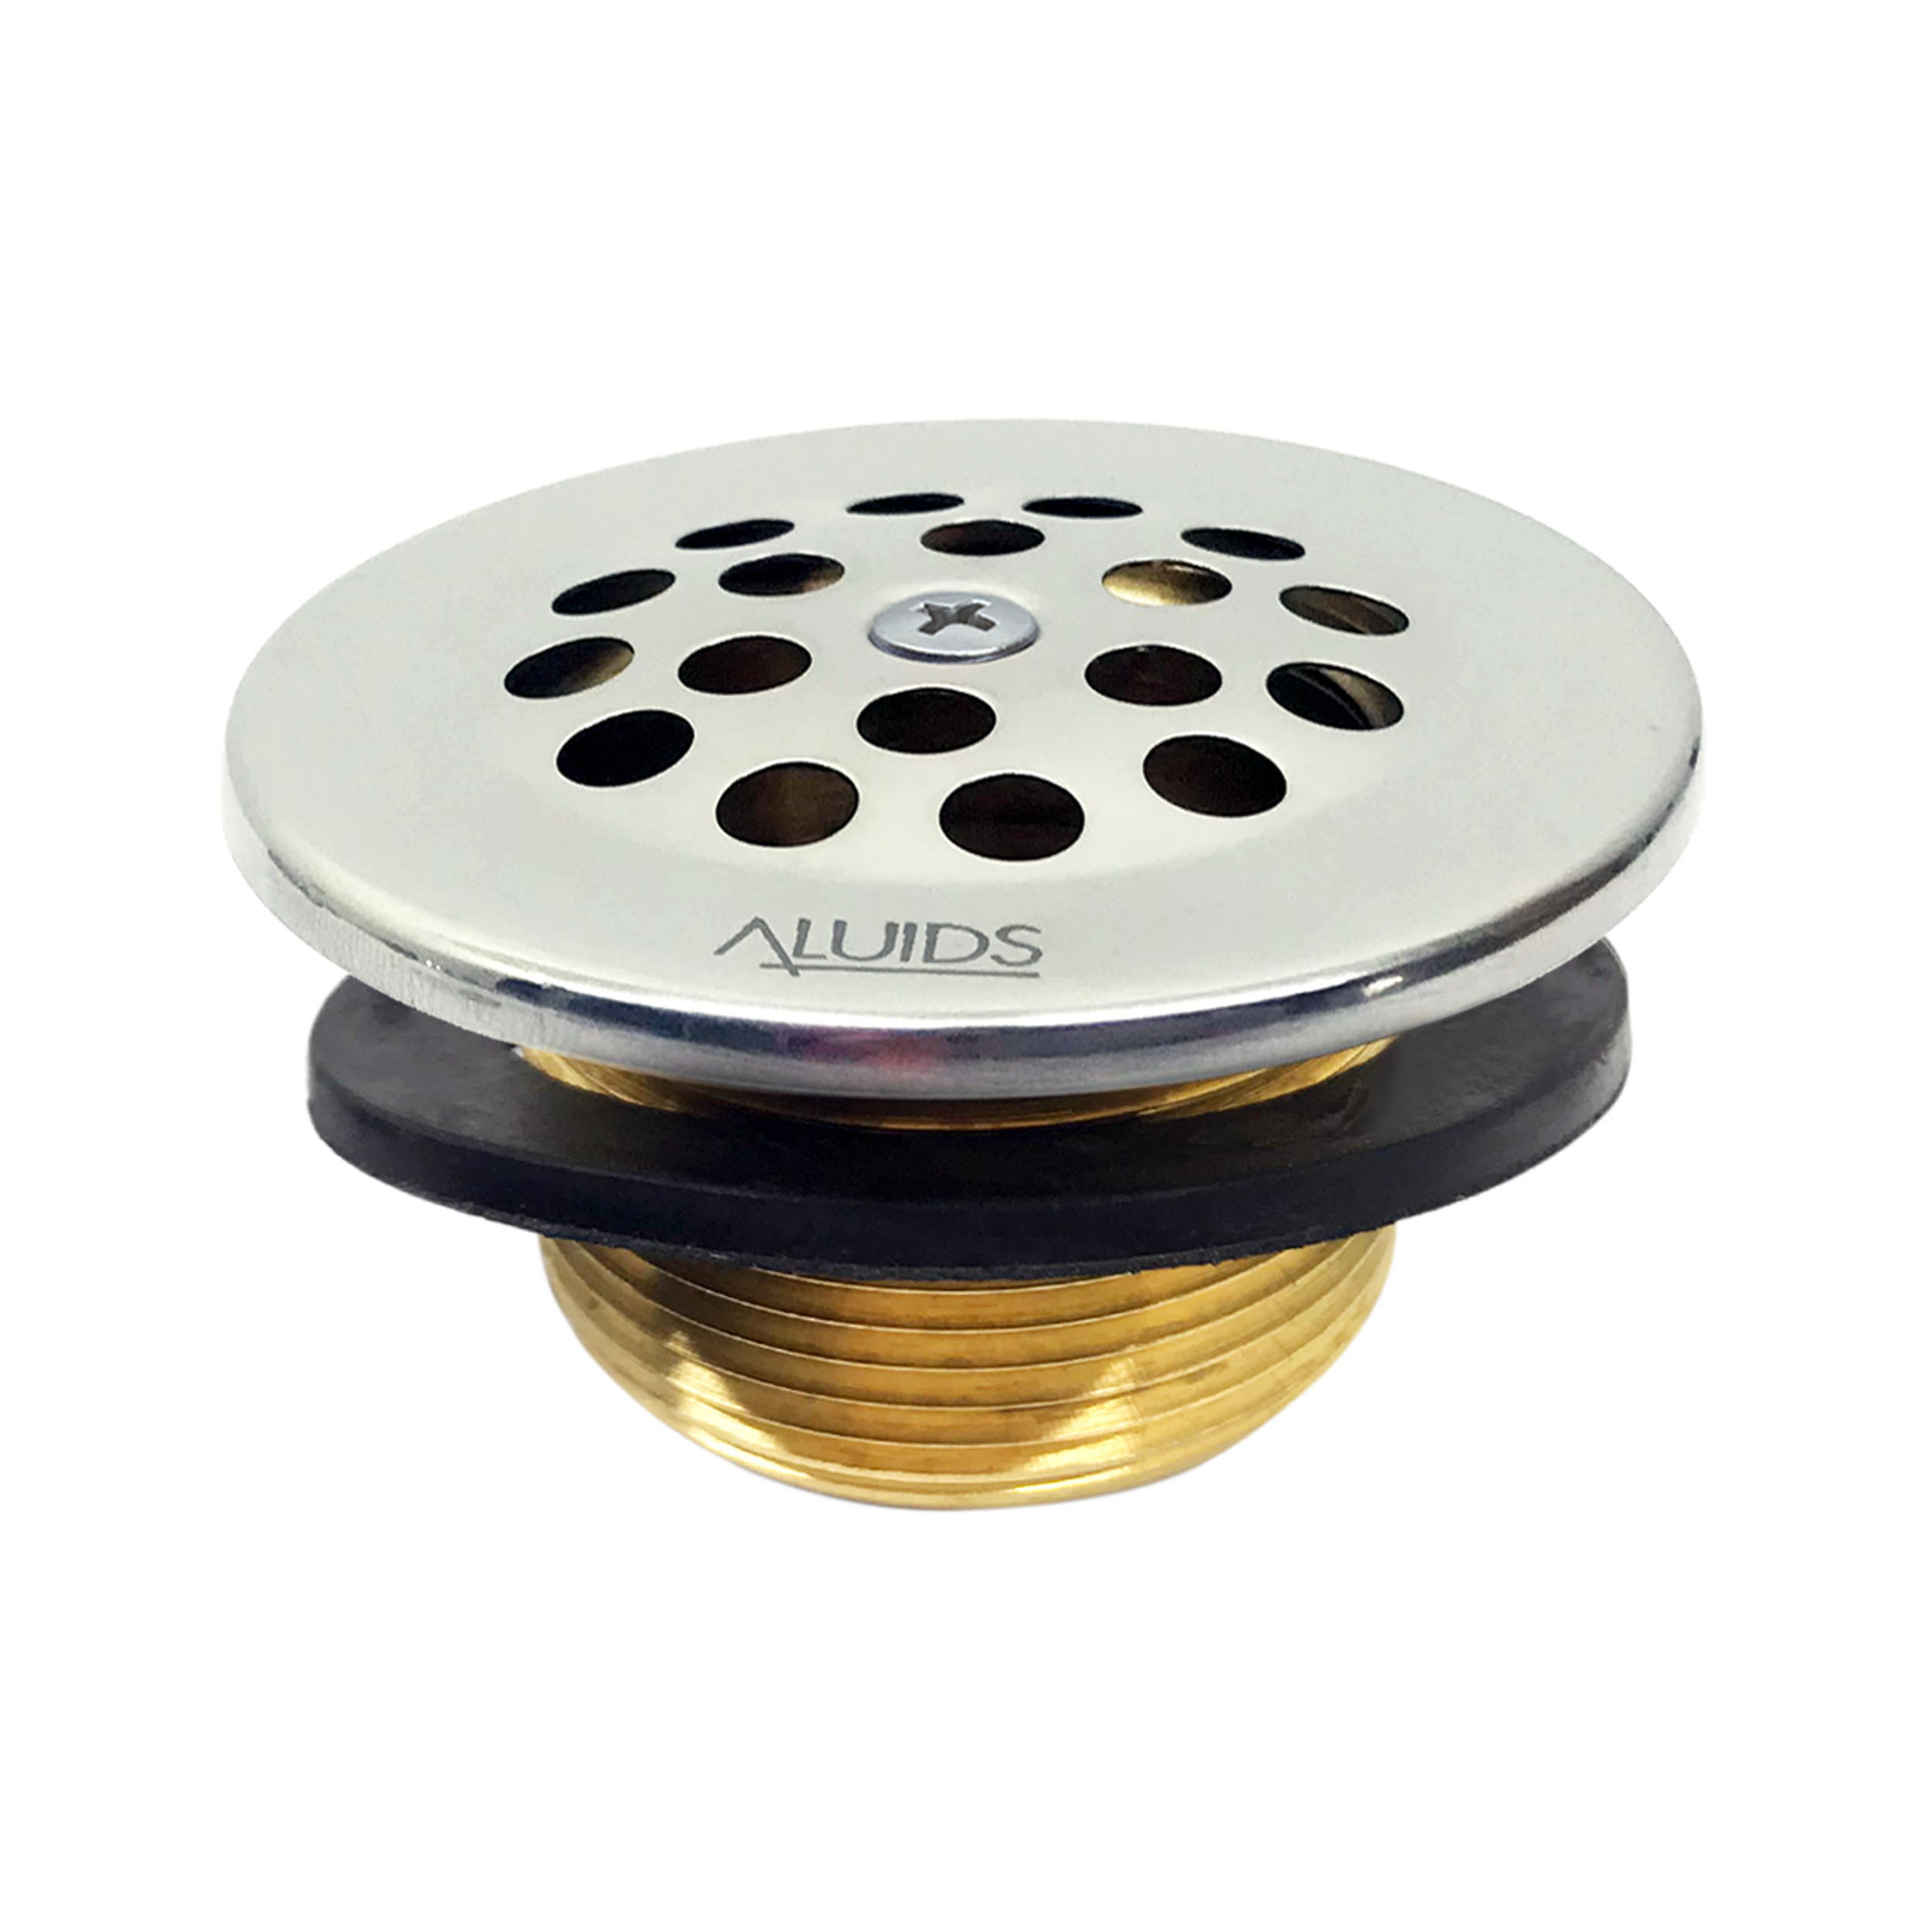 https://www.aluids.com/wp-content/uploads/2021/06/Tub-Drain-Strainer-Trim-Kit-with-Drain-Body-%E2%80%93-Polished-Chrome.png